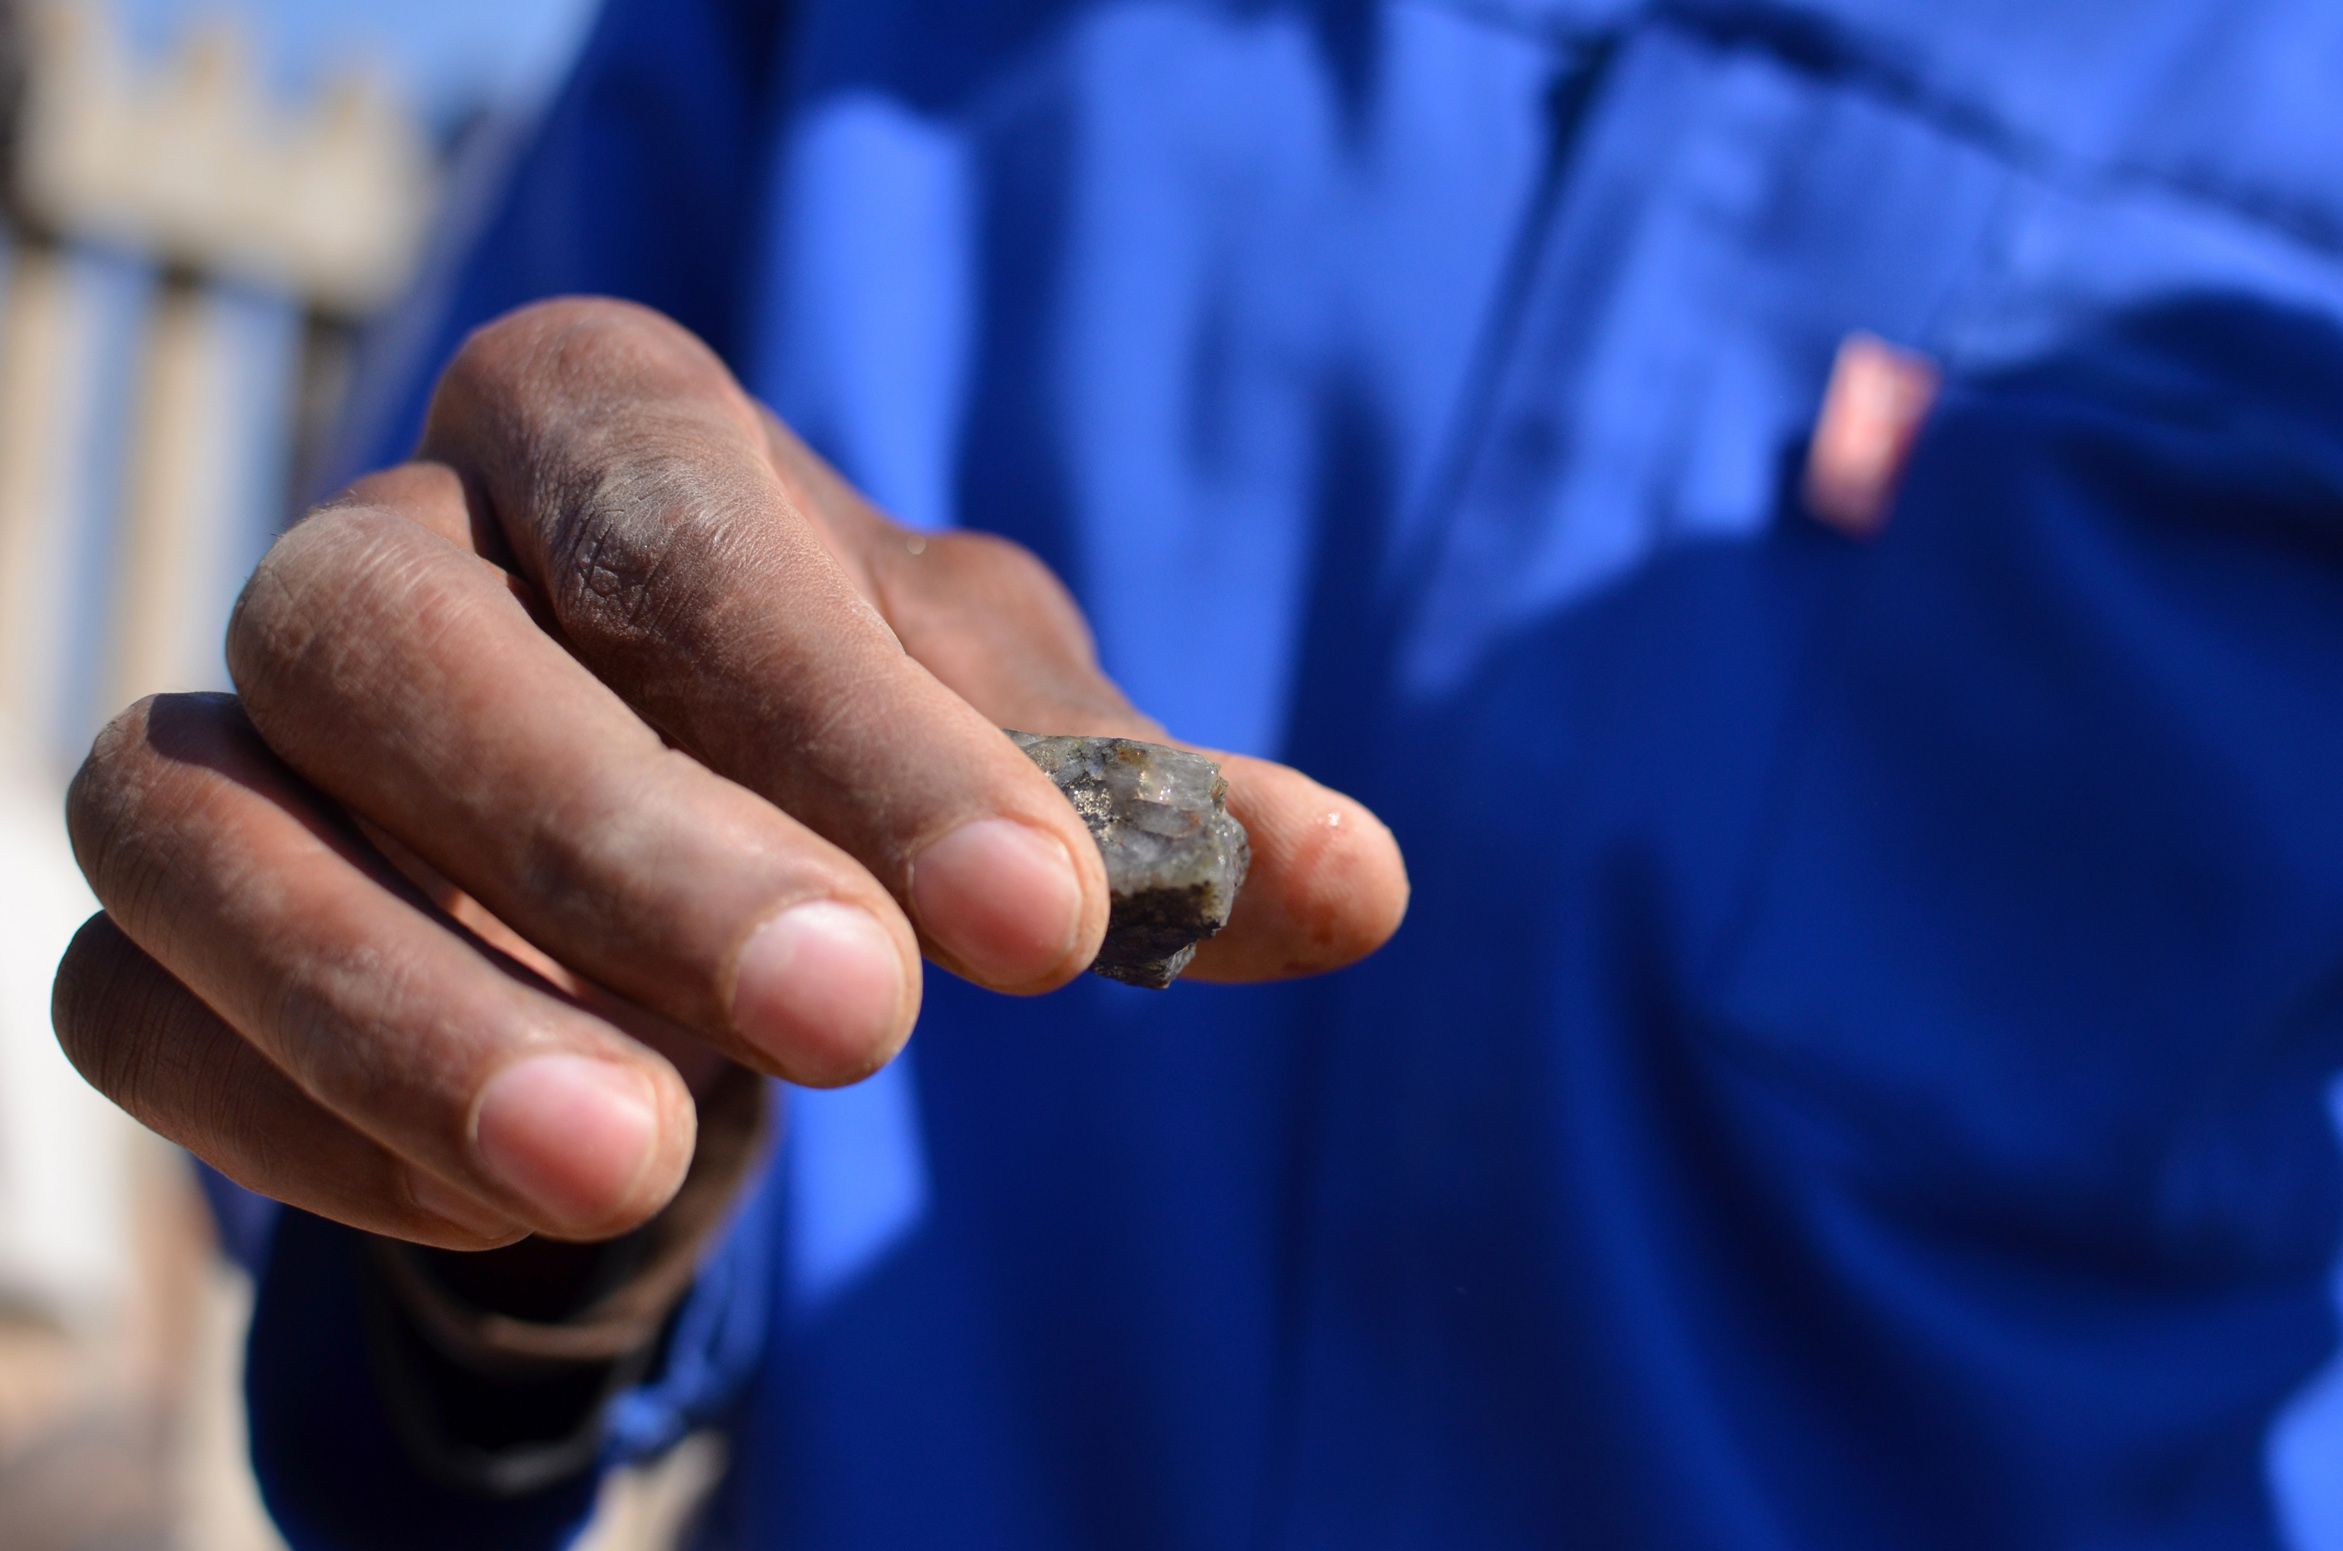 A South African, small-scale miner displays gold ore his operation dug out of a mine at the heritage park marking the discovery of gold on the Witwatersrand Basin. Image by Mark Olalde. South Africa, 2017.